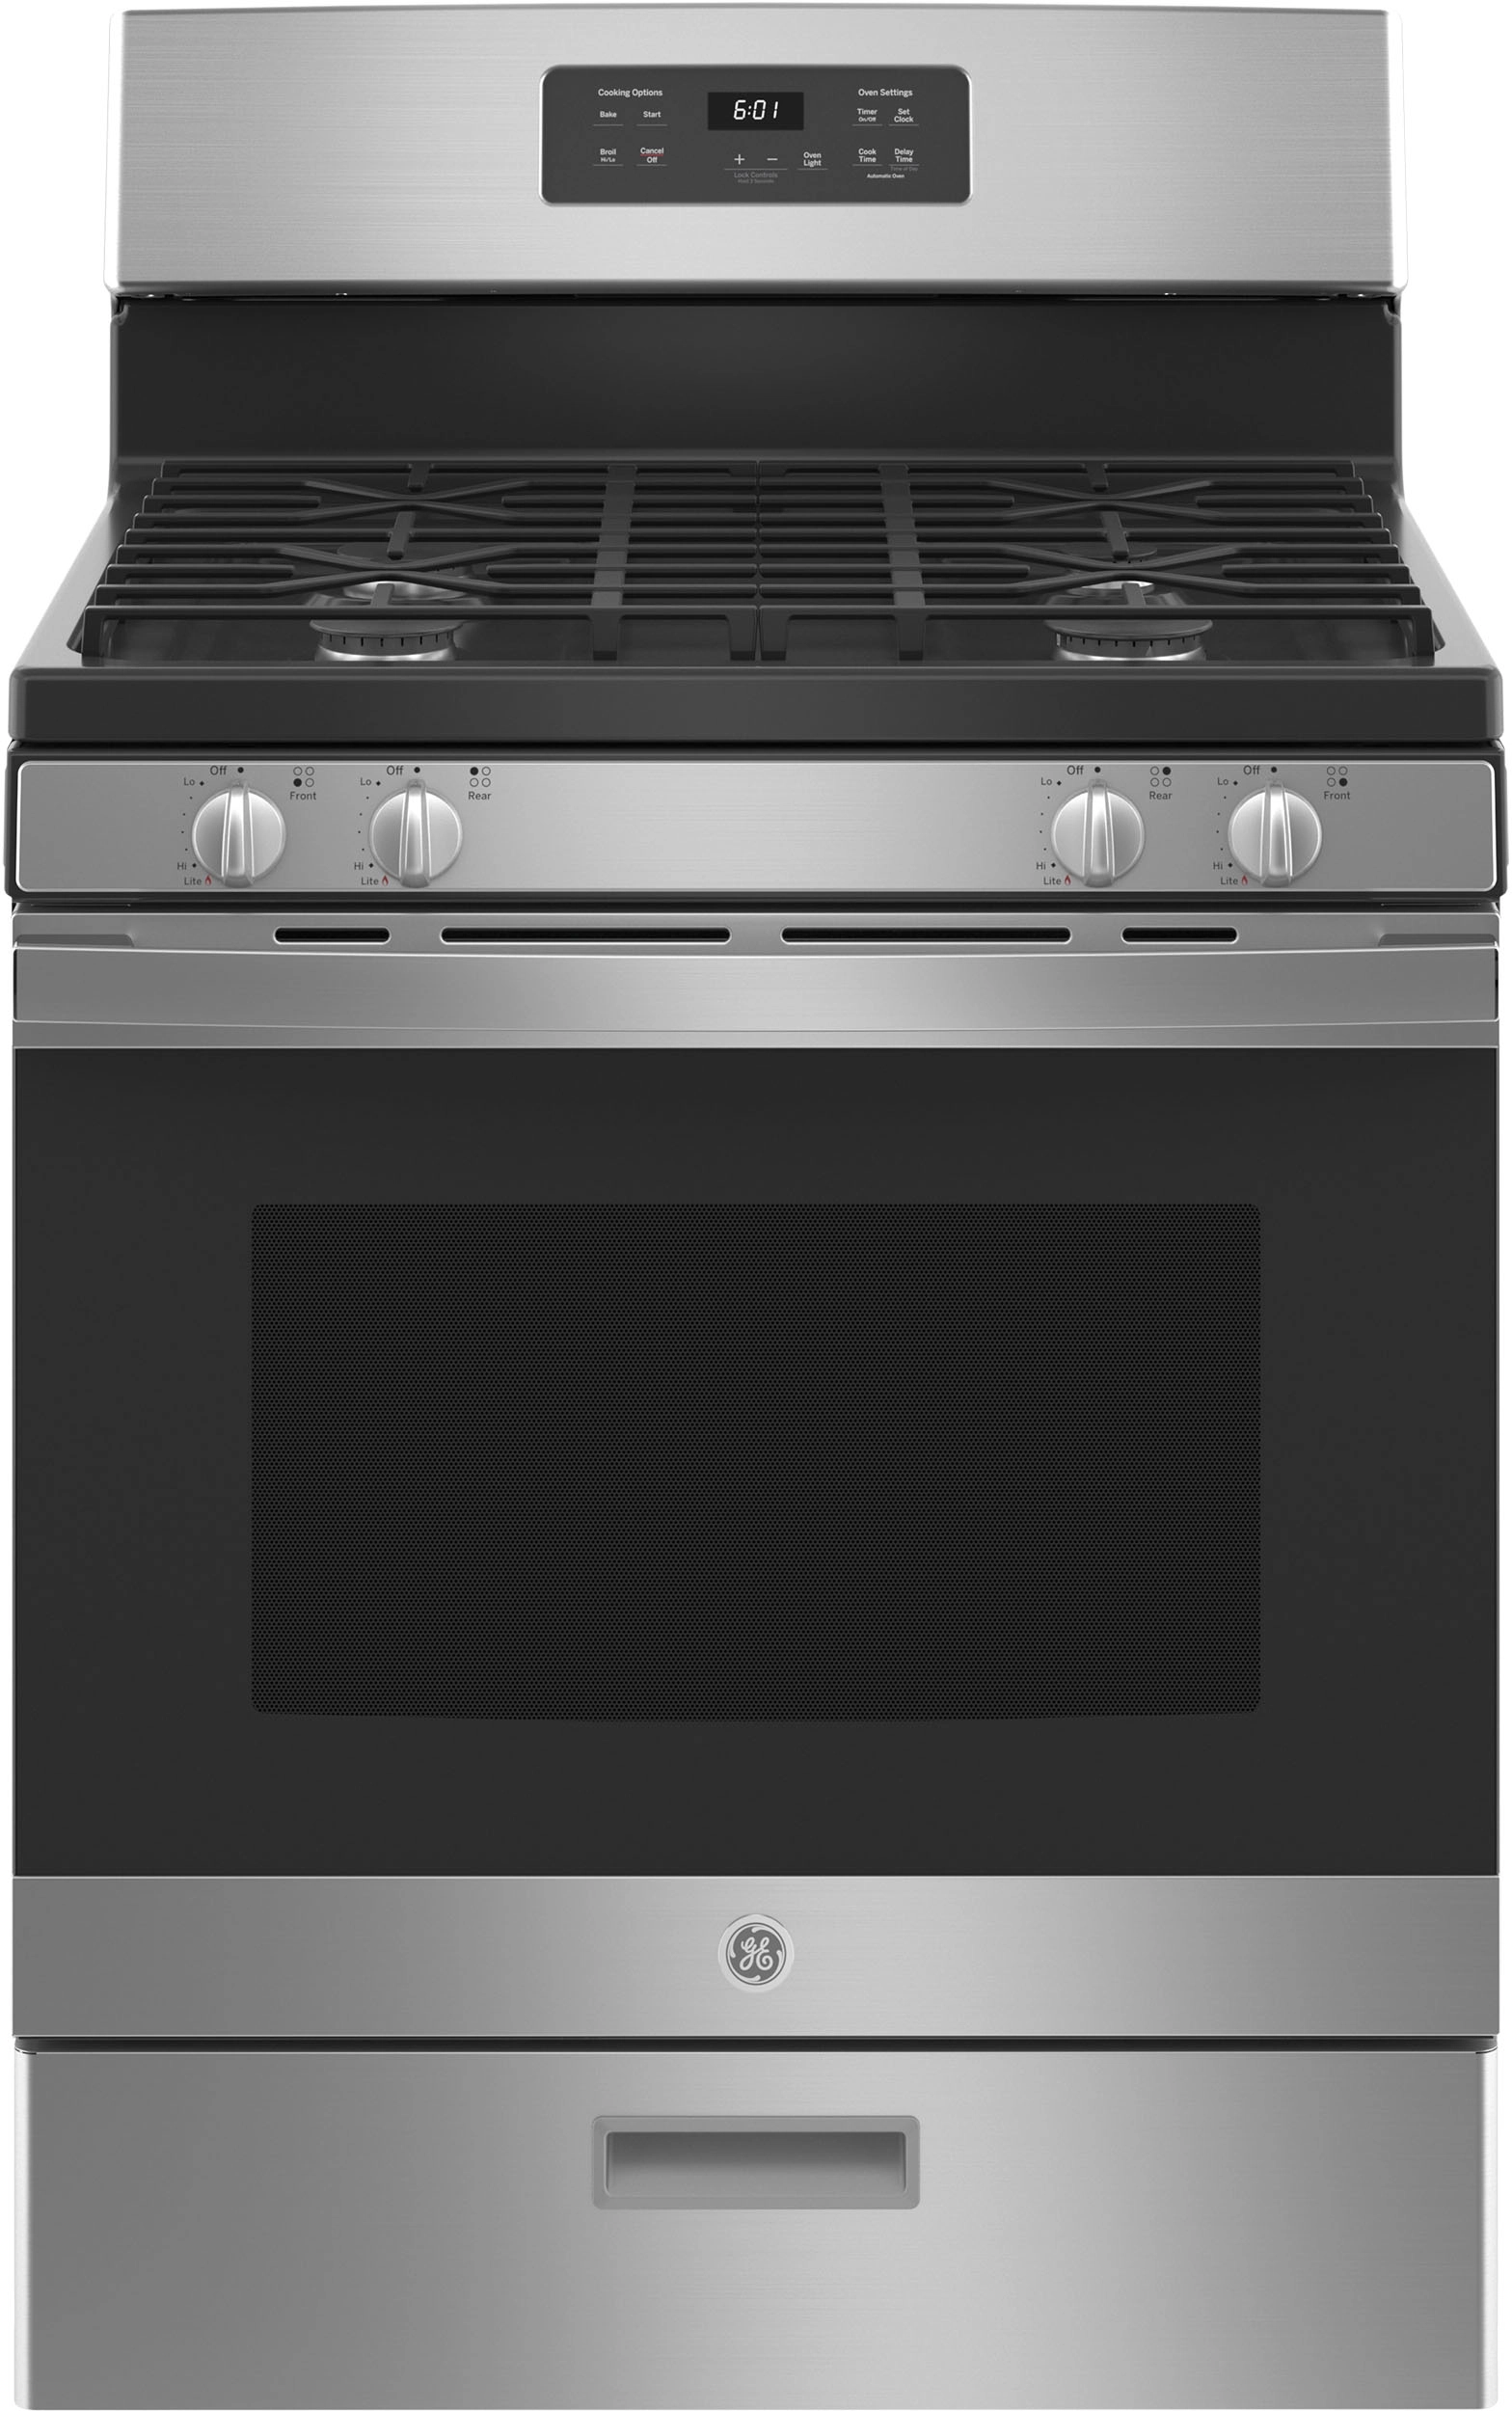 General Electric 30 Inch Freestanding Gas Range with 4 Sealed Burners